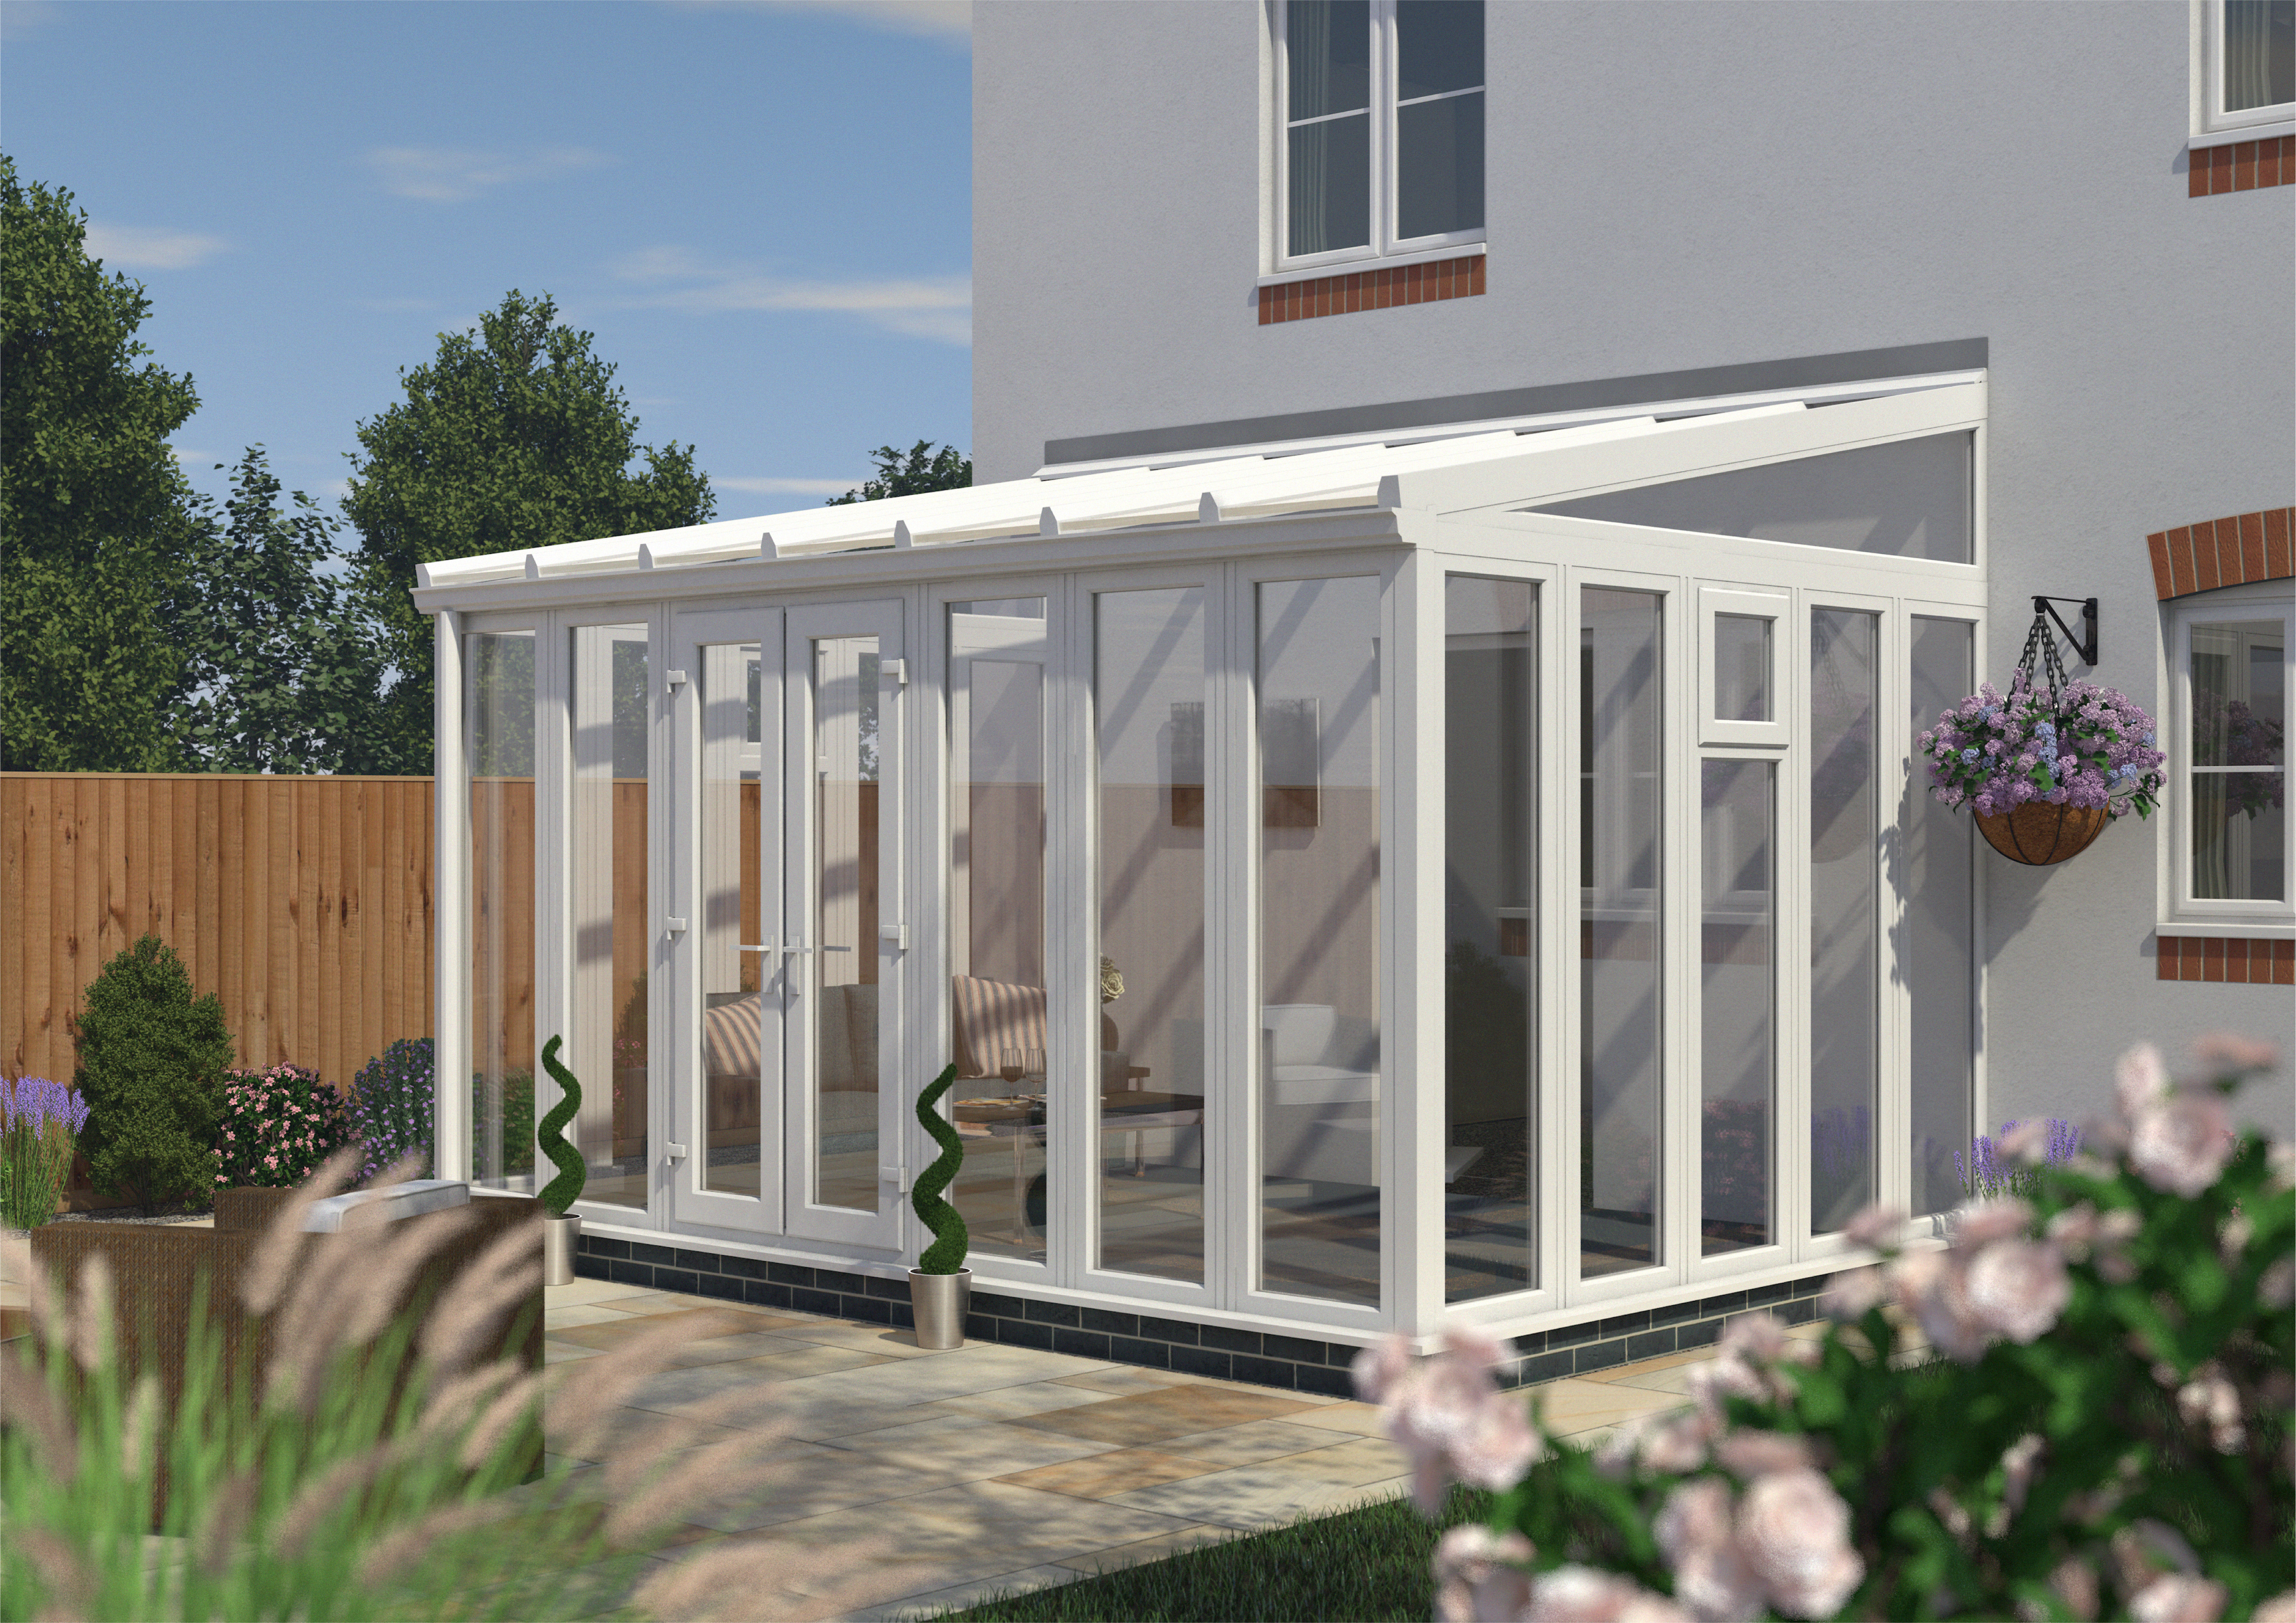 Image of Euramax Lean To Conservatory Full Height - White - 14 ft x 10ft